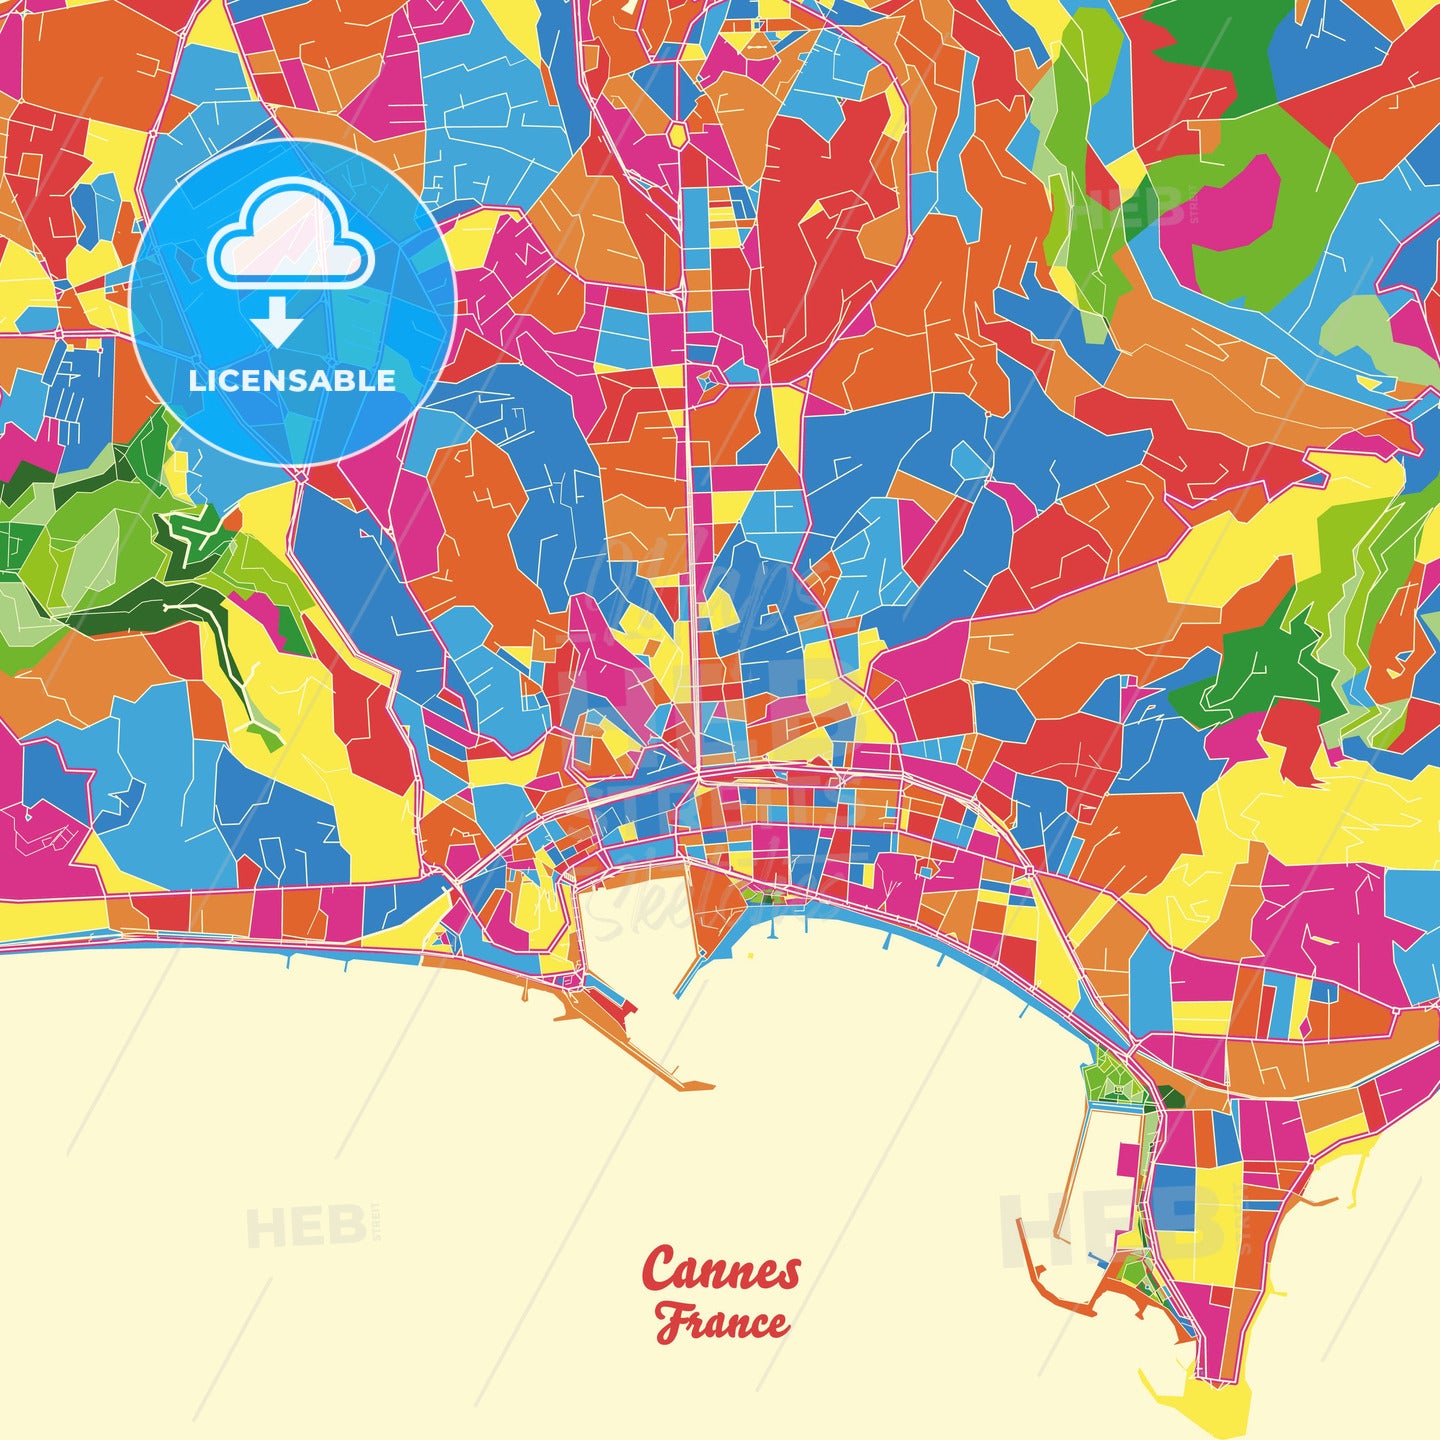 Cannes, France Crazy Colorful Street Map Poster Template - HEBSTREITS Sketches